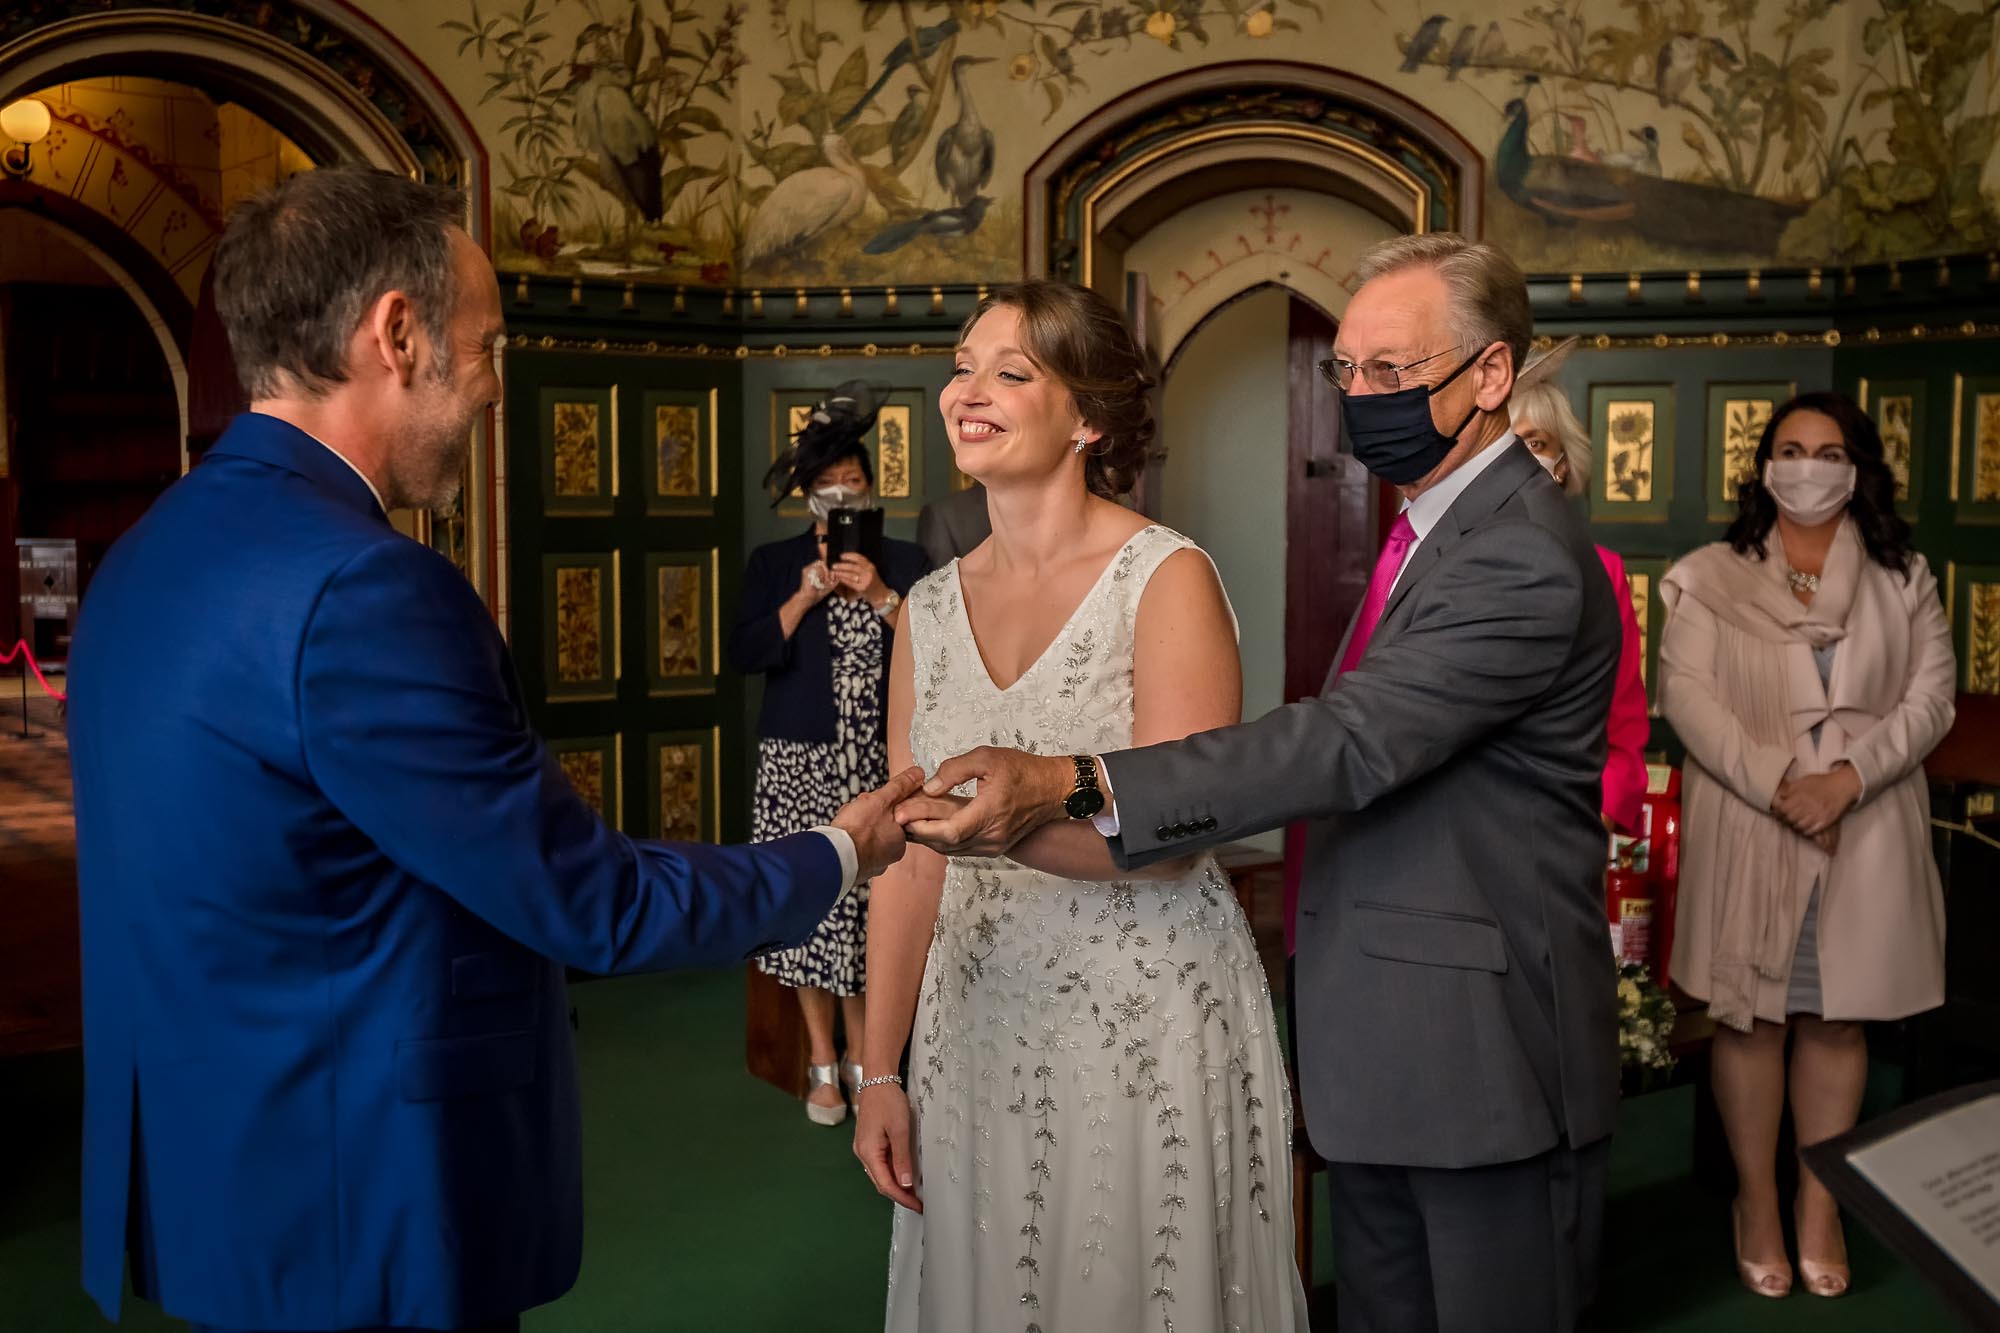 The bride's father gives her away at her wedding at Castell Coch near Cardiff